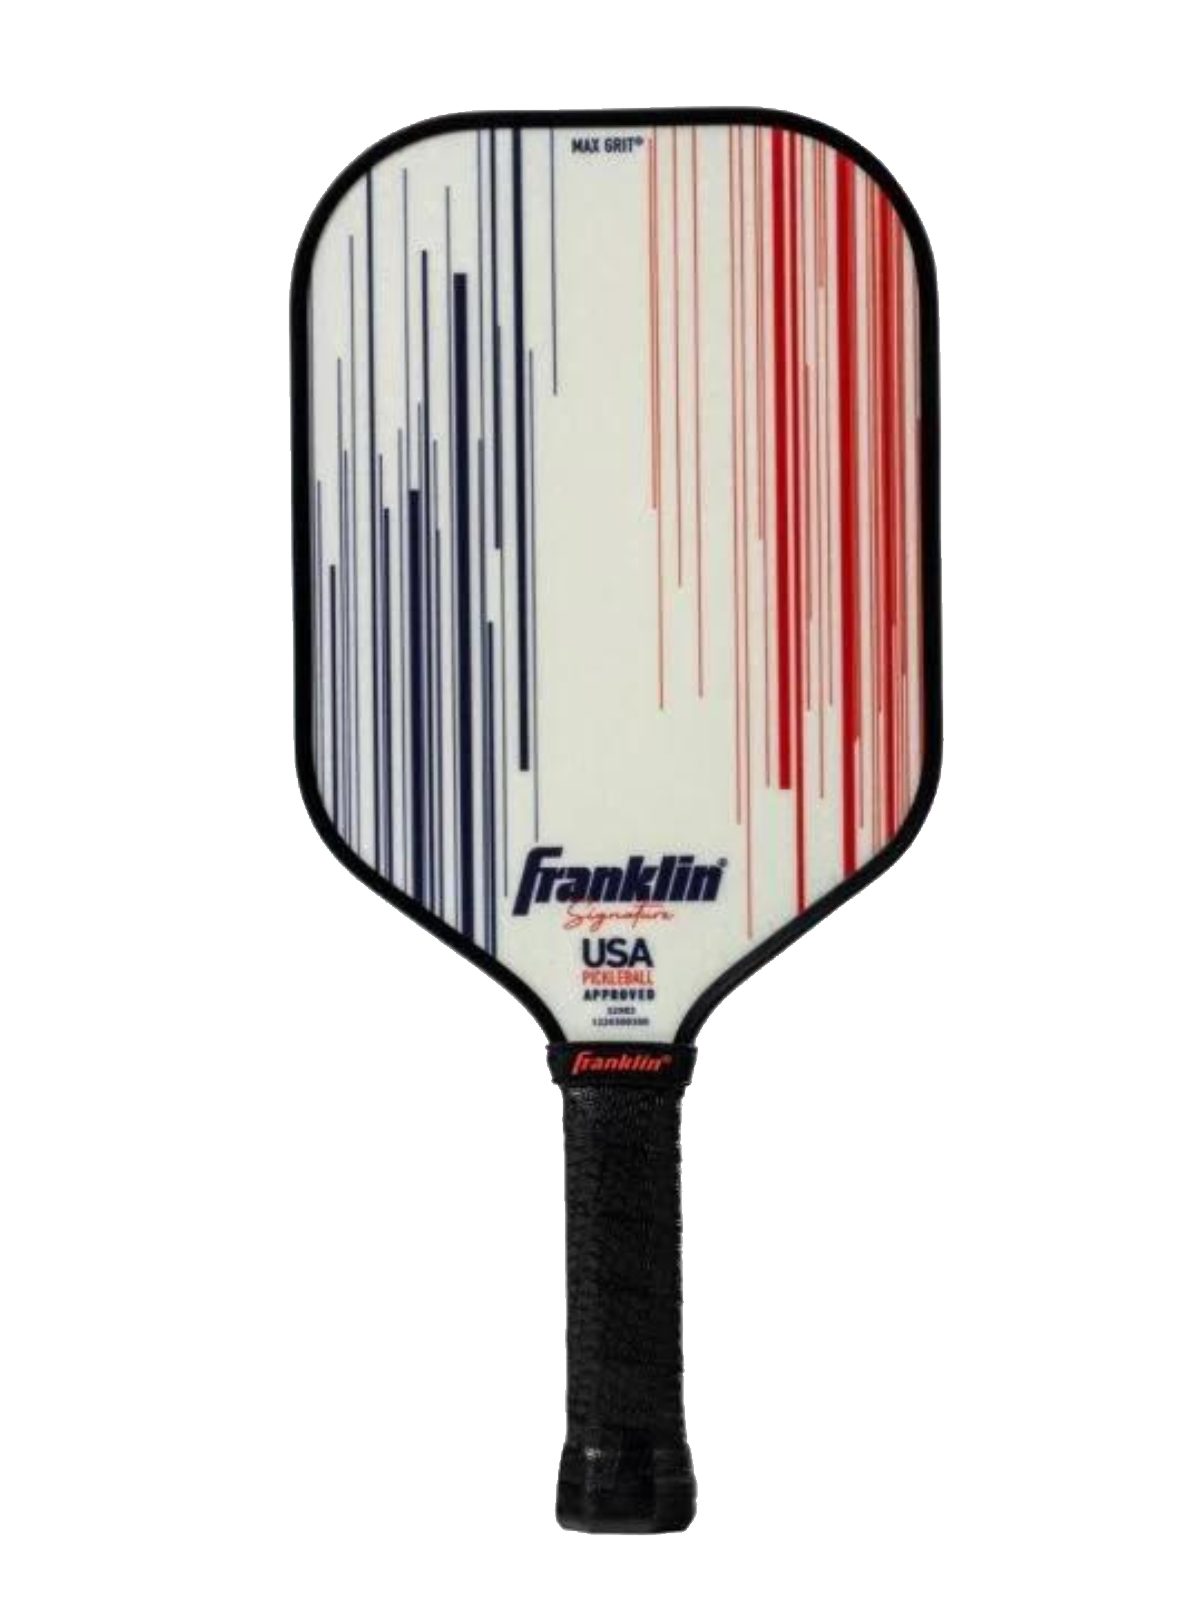 Franklin Signature Pickleball Paddle with MaxGrit®